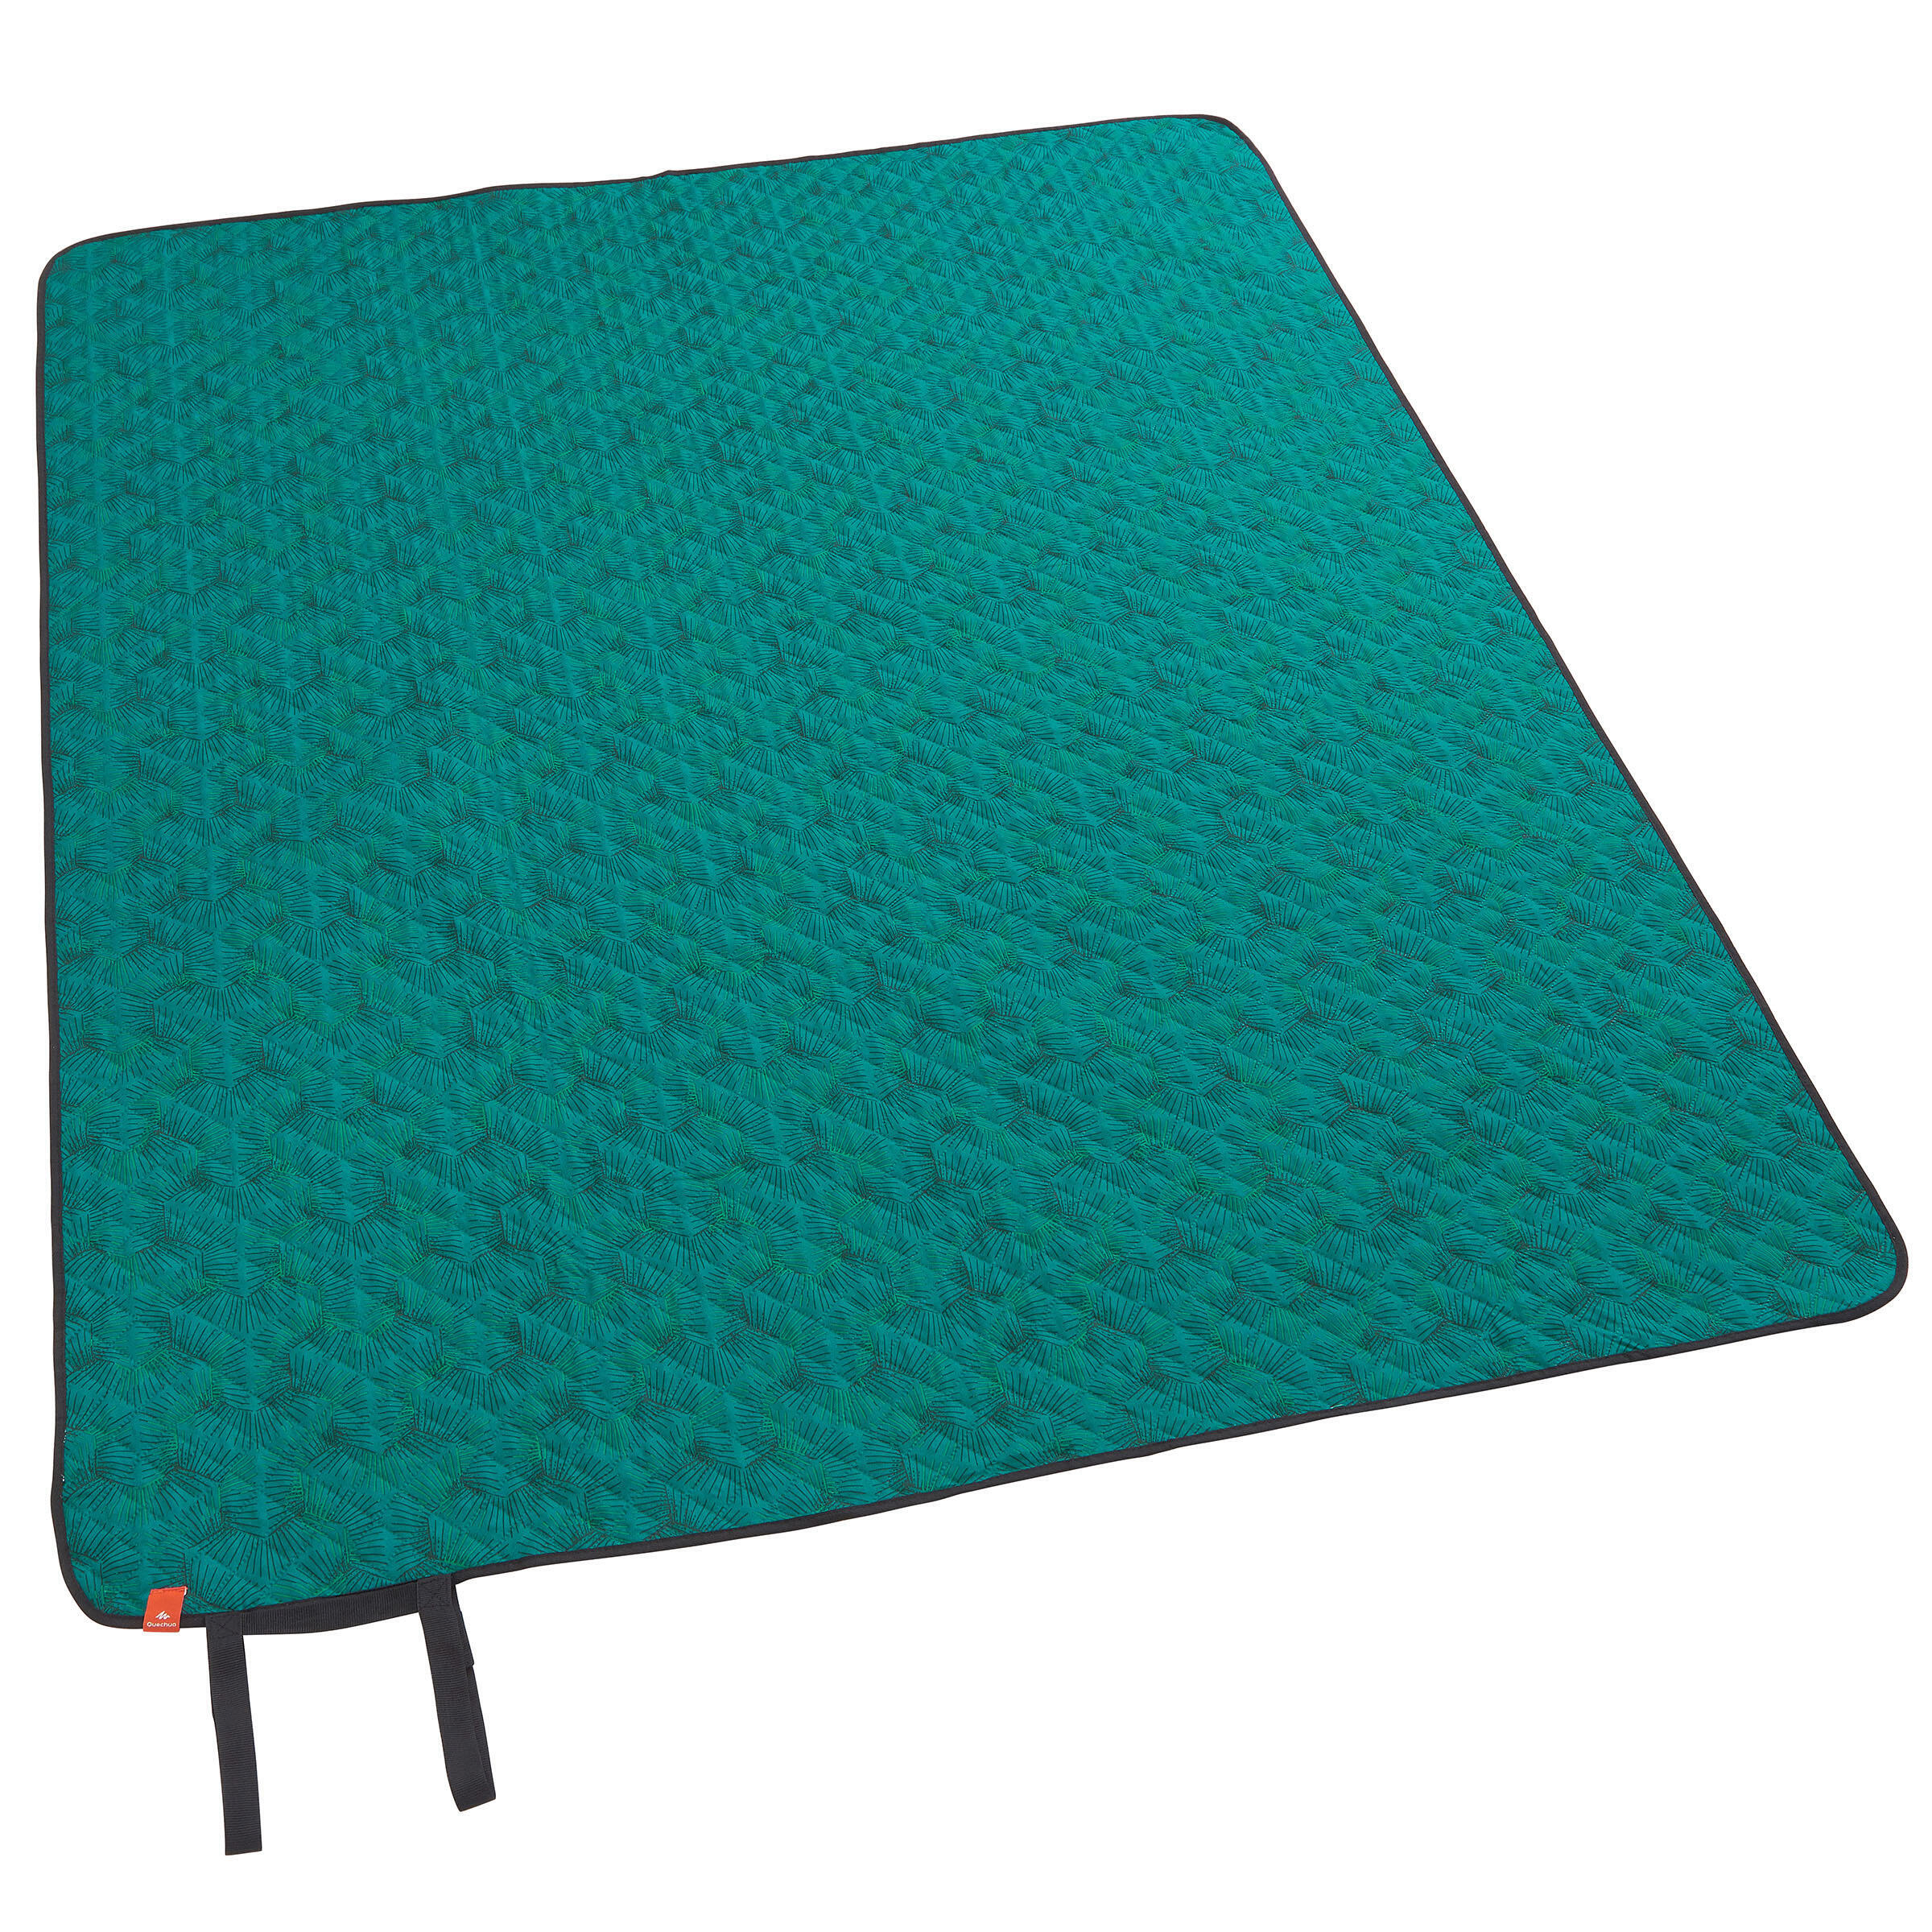 Camping and Walking Rug - 140 x 170 cm - Green 1/10